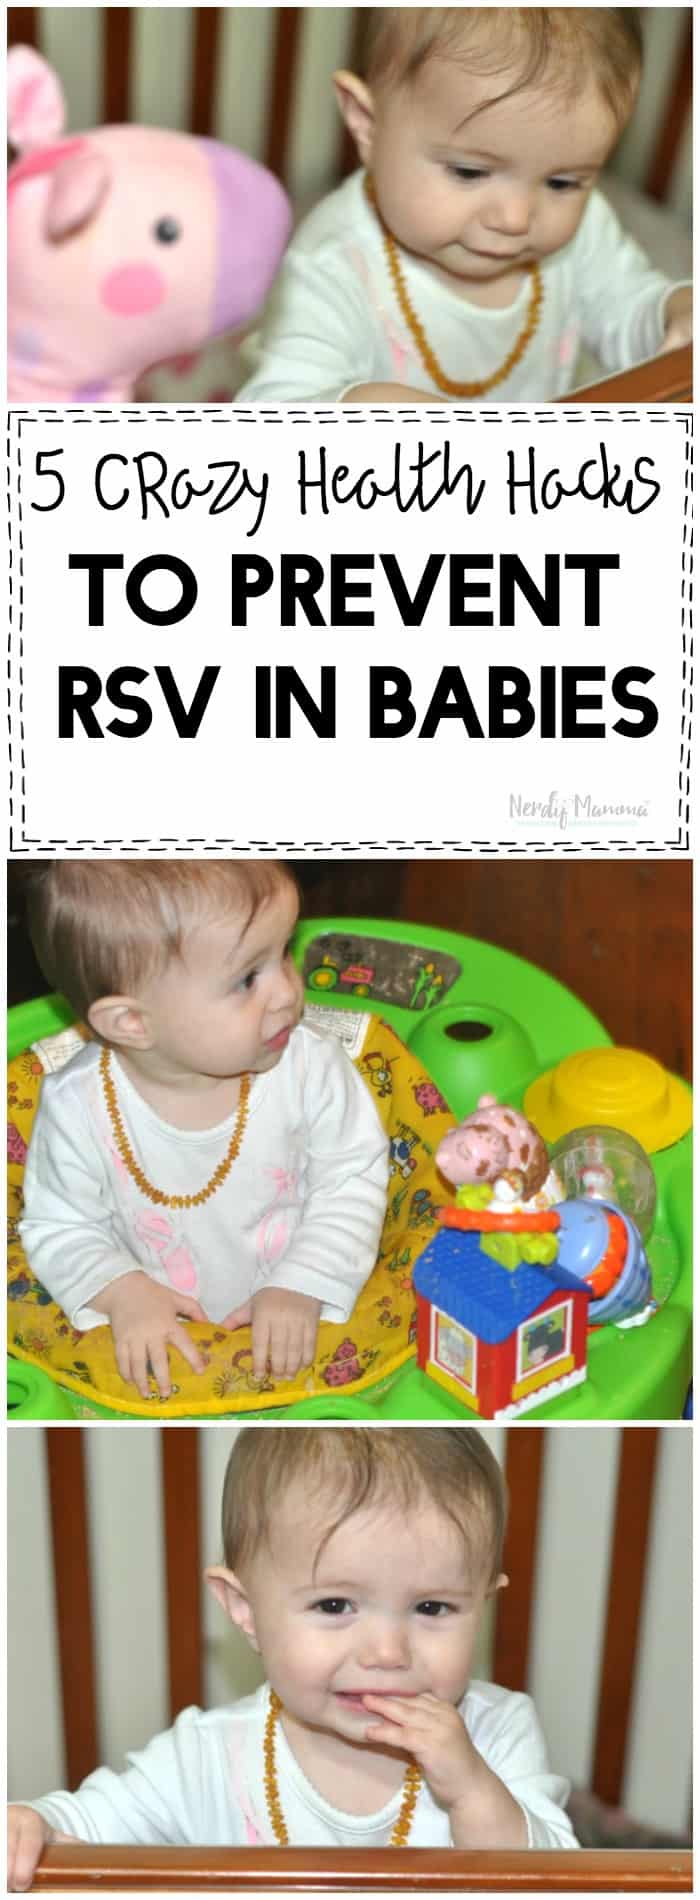 Having a little baby during RSV season is so scary! That's why I love these crazy health hacks to prevent RSV in babies!